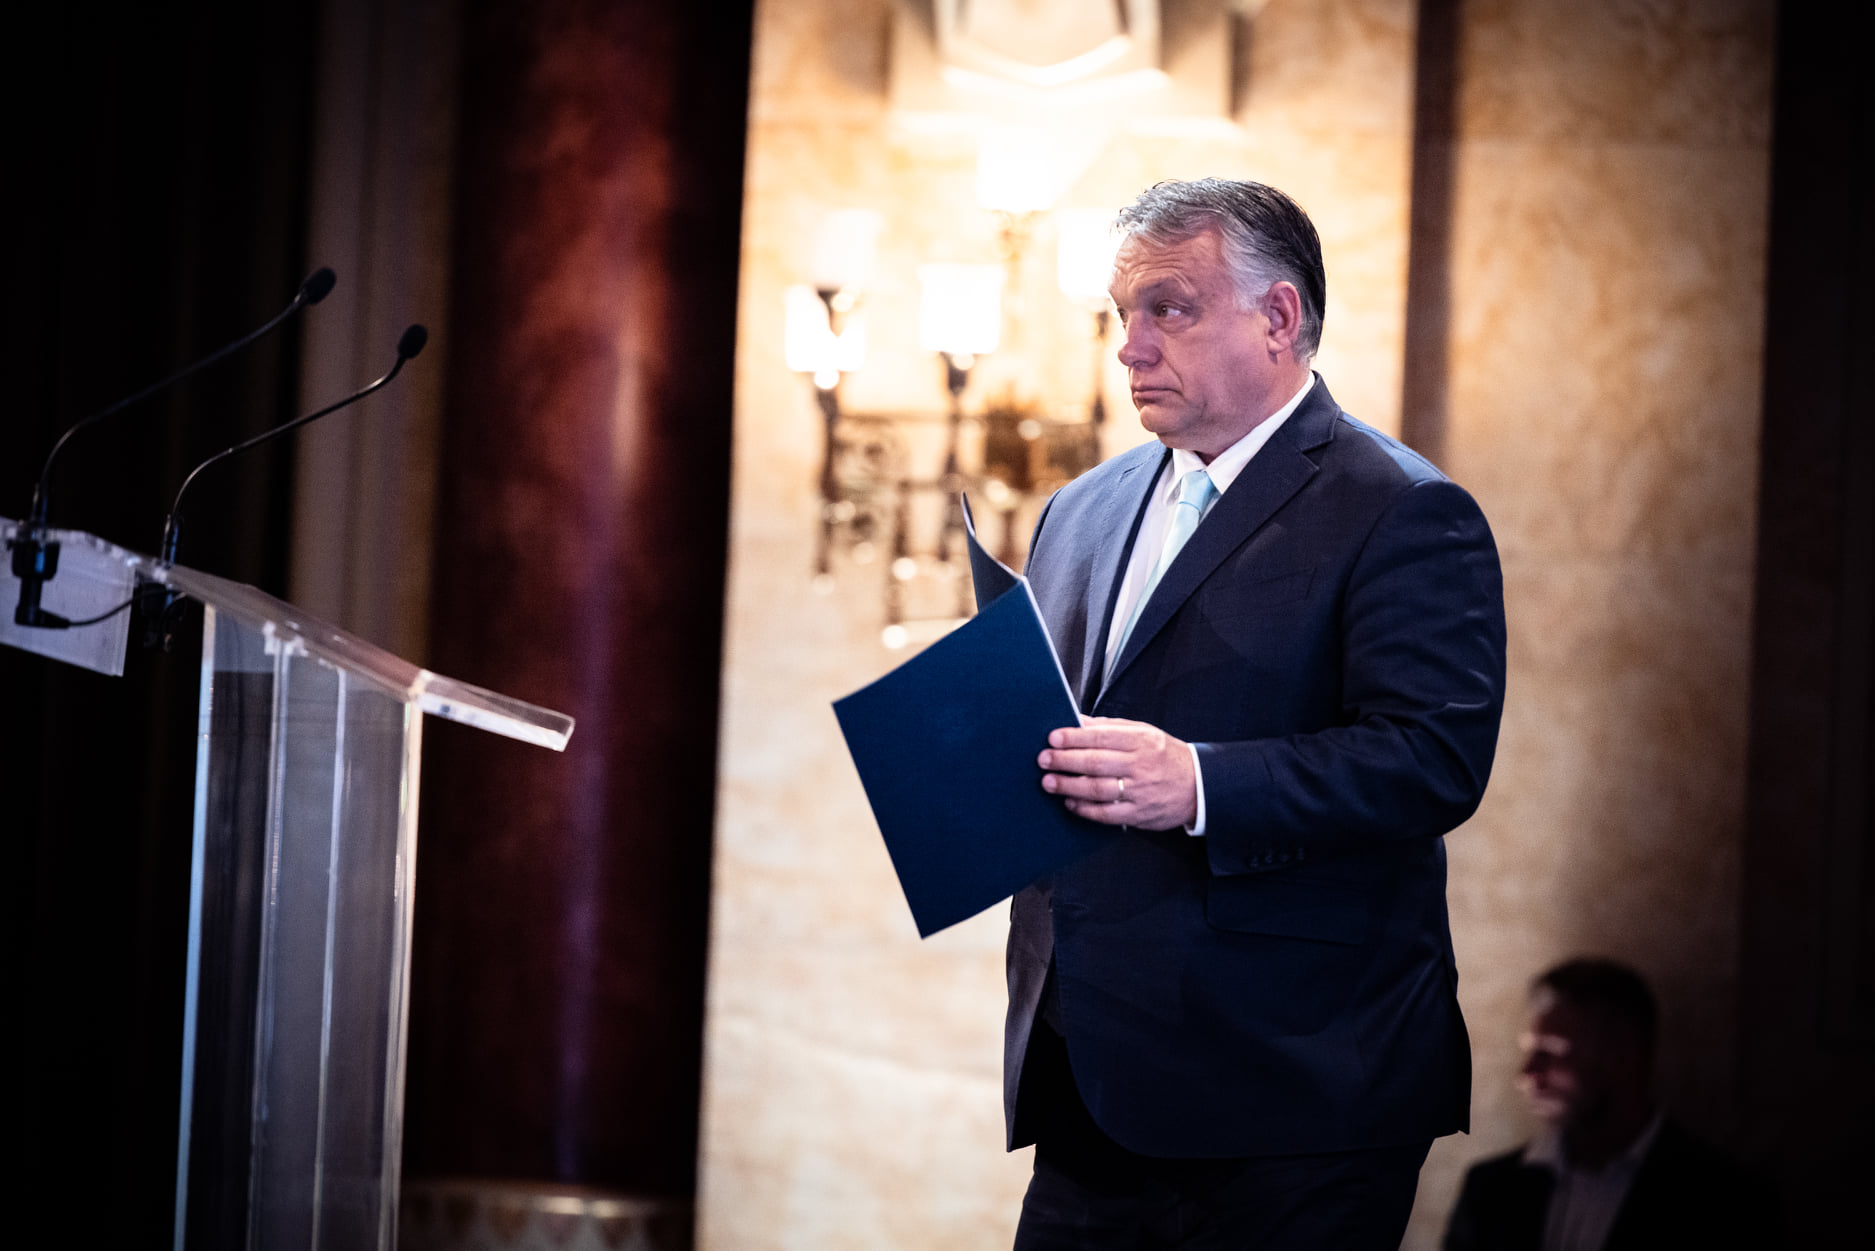 PM Orbán Concludes Talks on Forming Government